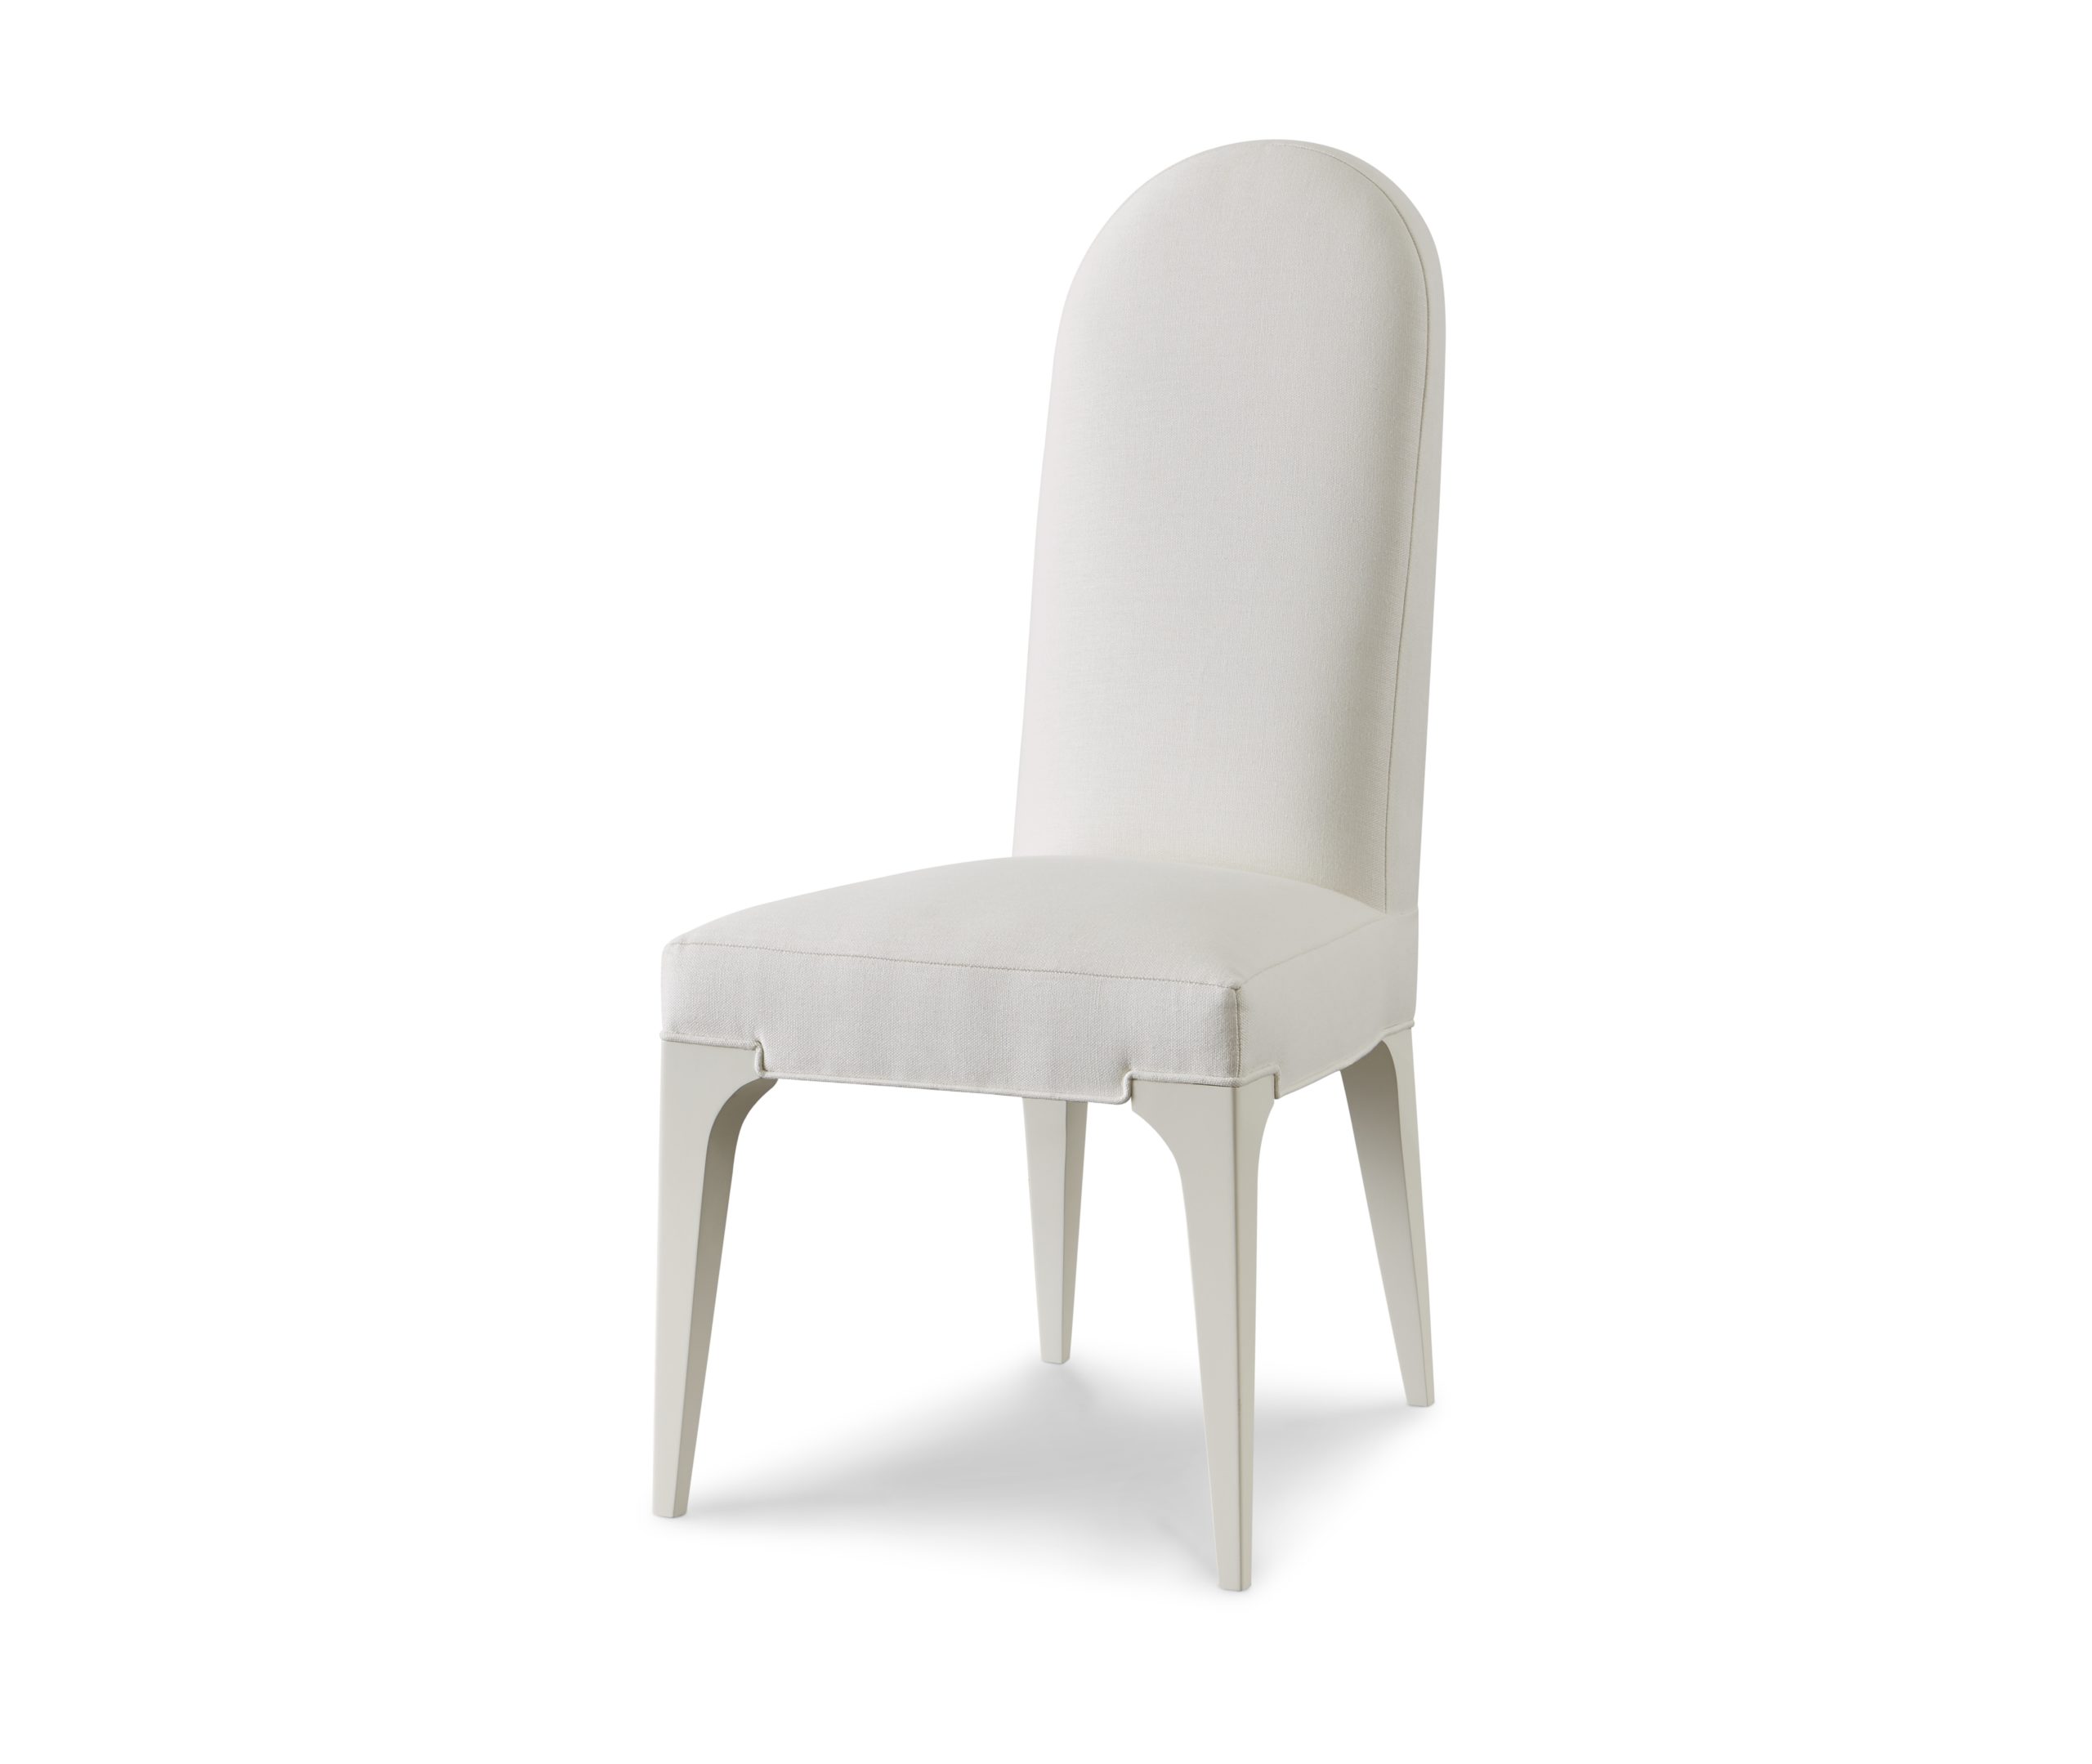 Baker_products_WNWN_declan_chair_BAA3041_FRONT_3QRT-scaled-2